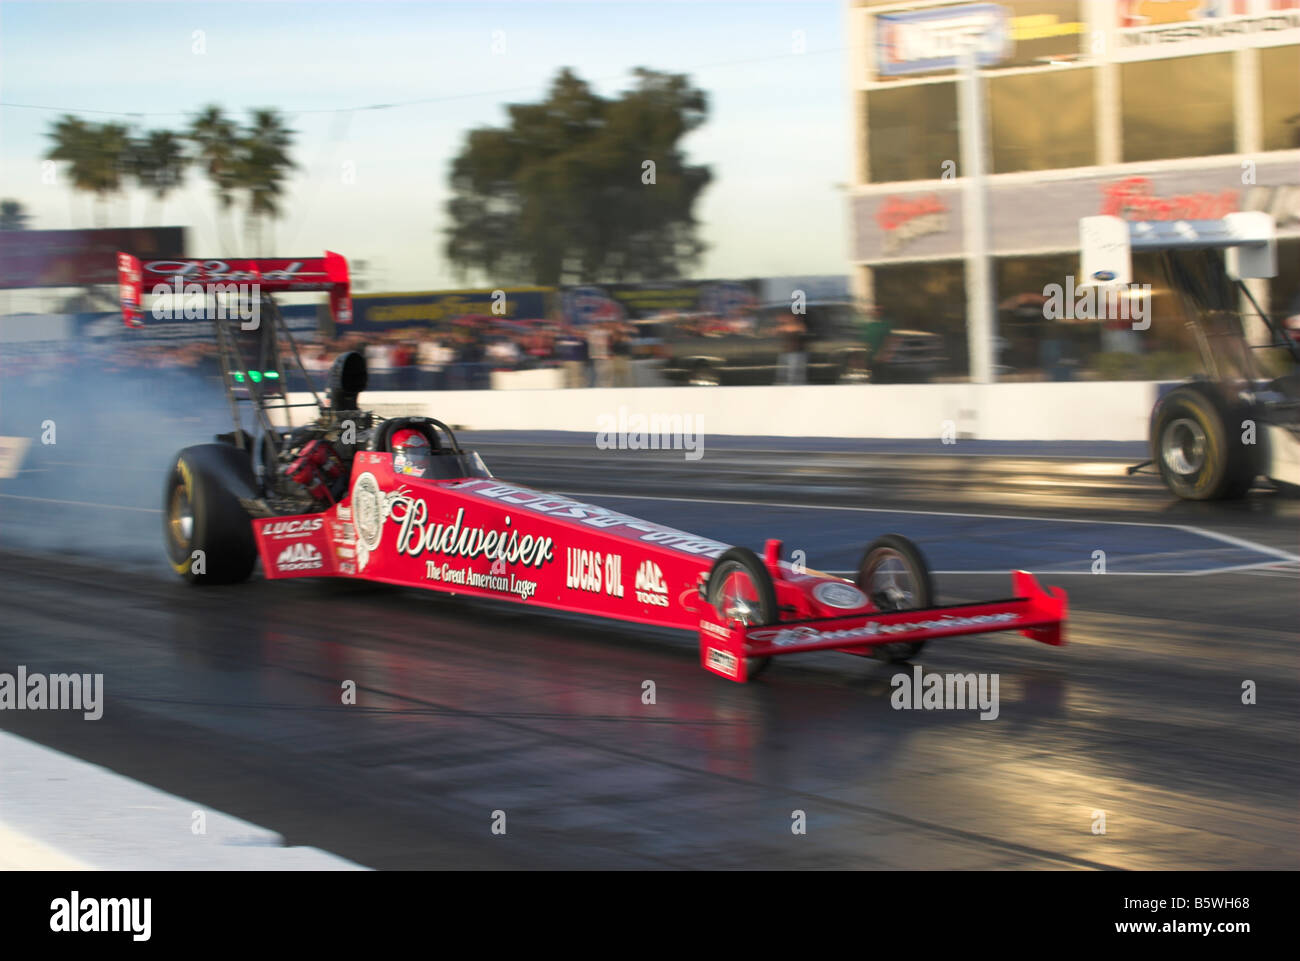 Brandon Bernstein's 'Budweiser' NHRA Top Fuel dragster - taking off from the start line. Stock Photo